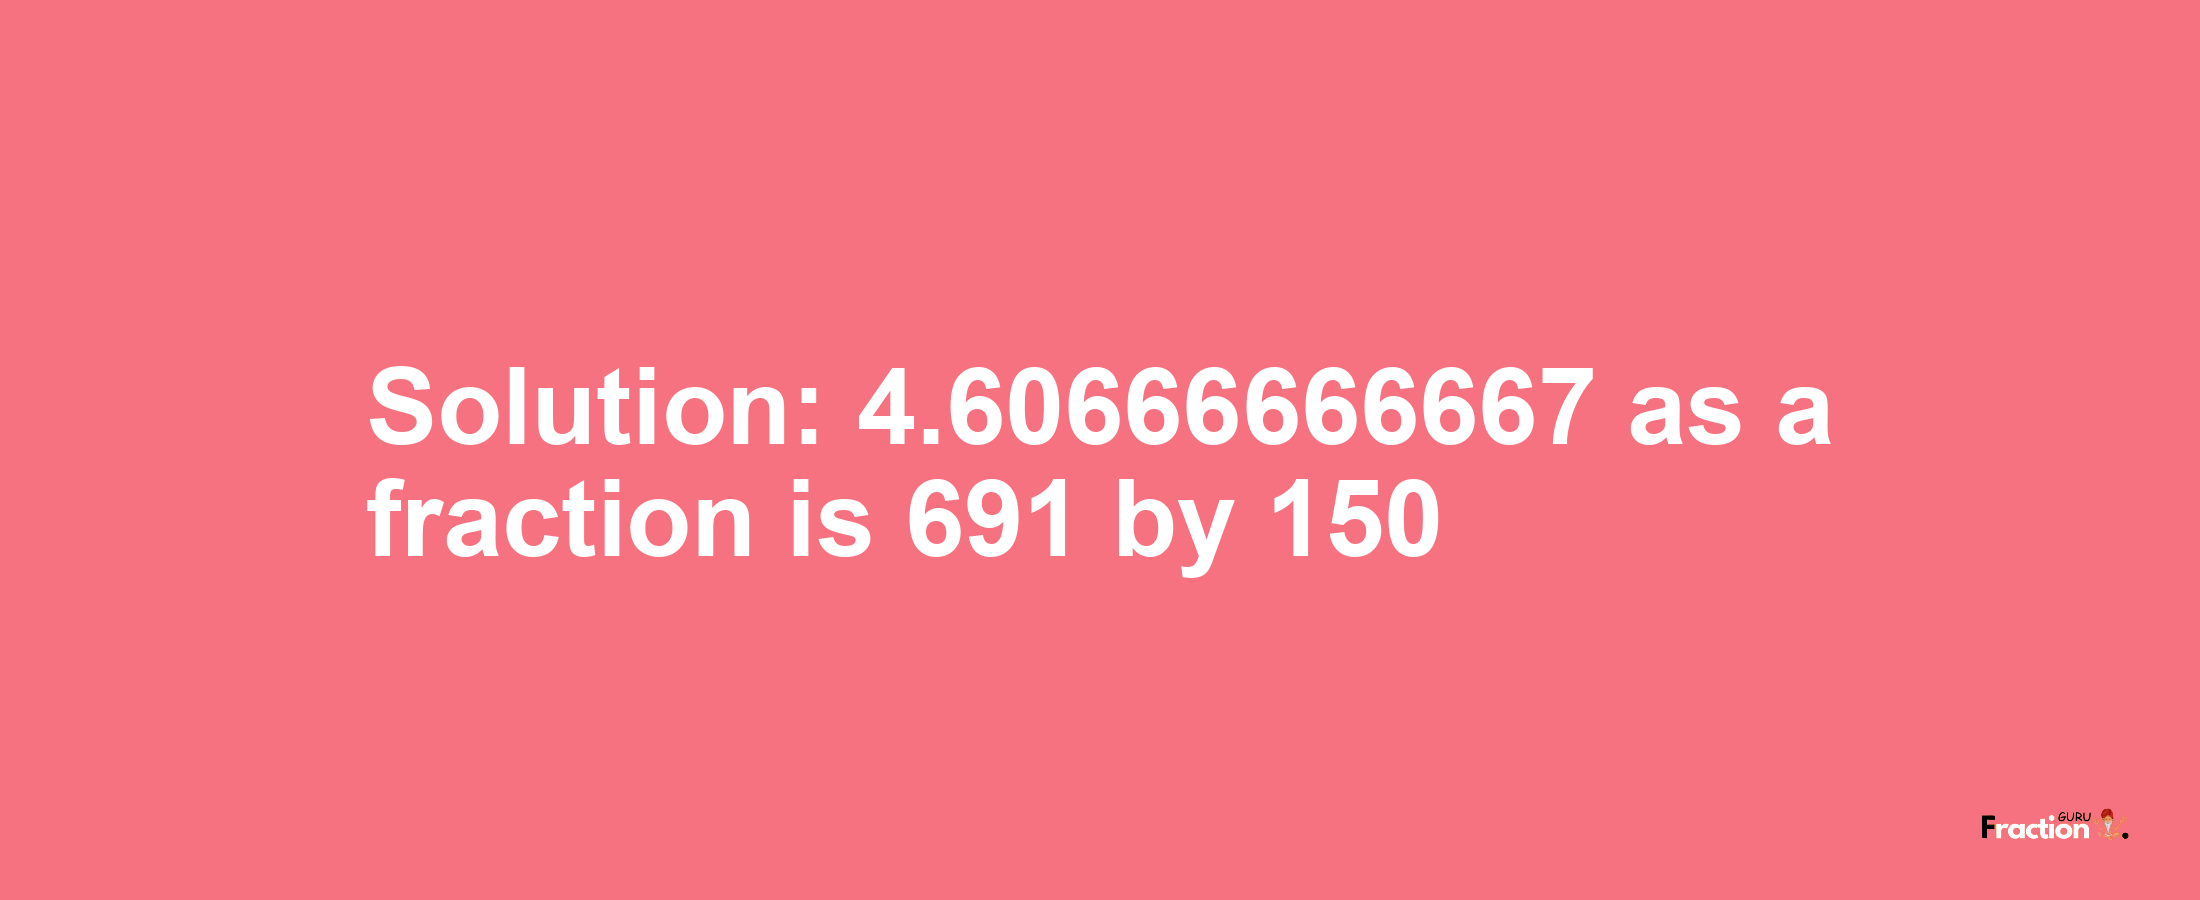 Solution:4.60666666667 as a fraction is 691/150